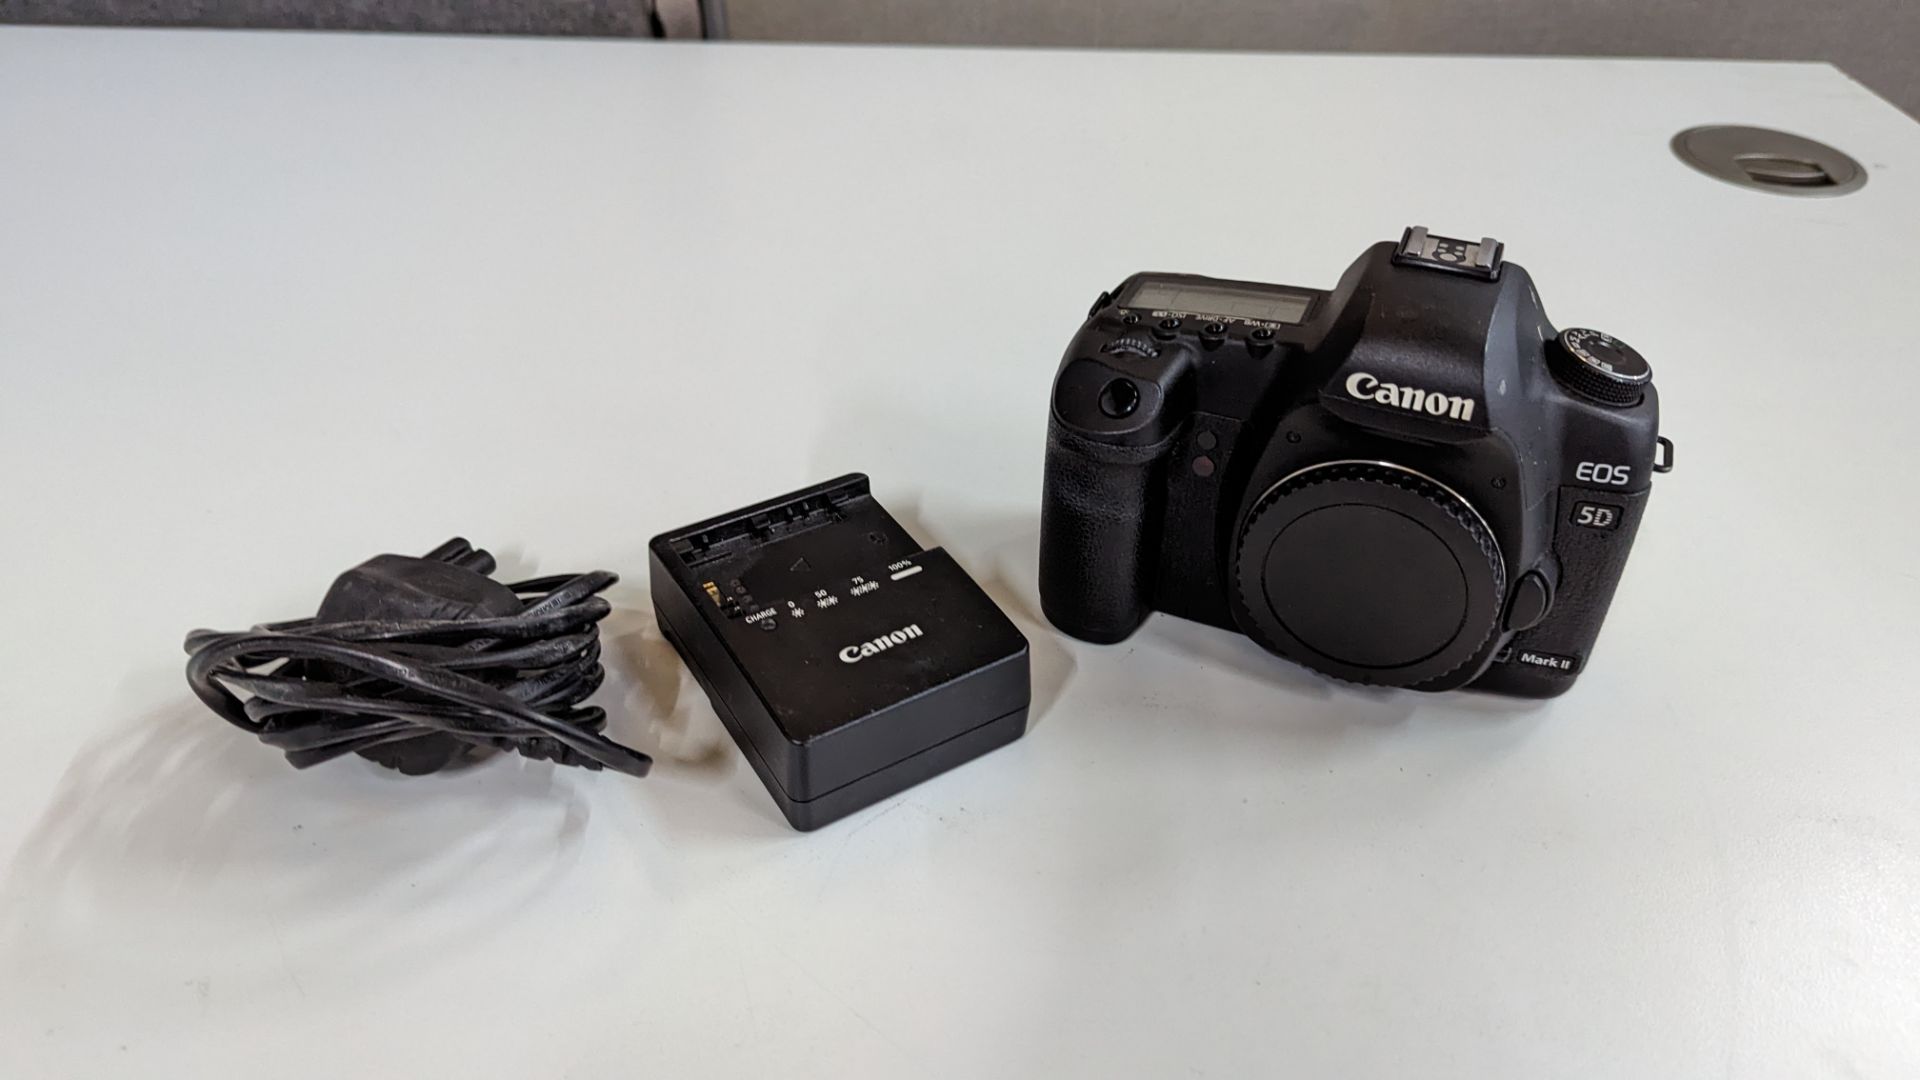 Canon EOS 5D Mark II digital camera plus Canon battery charger. N.B. no lens or battery included wi - Image 4 of 11